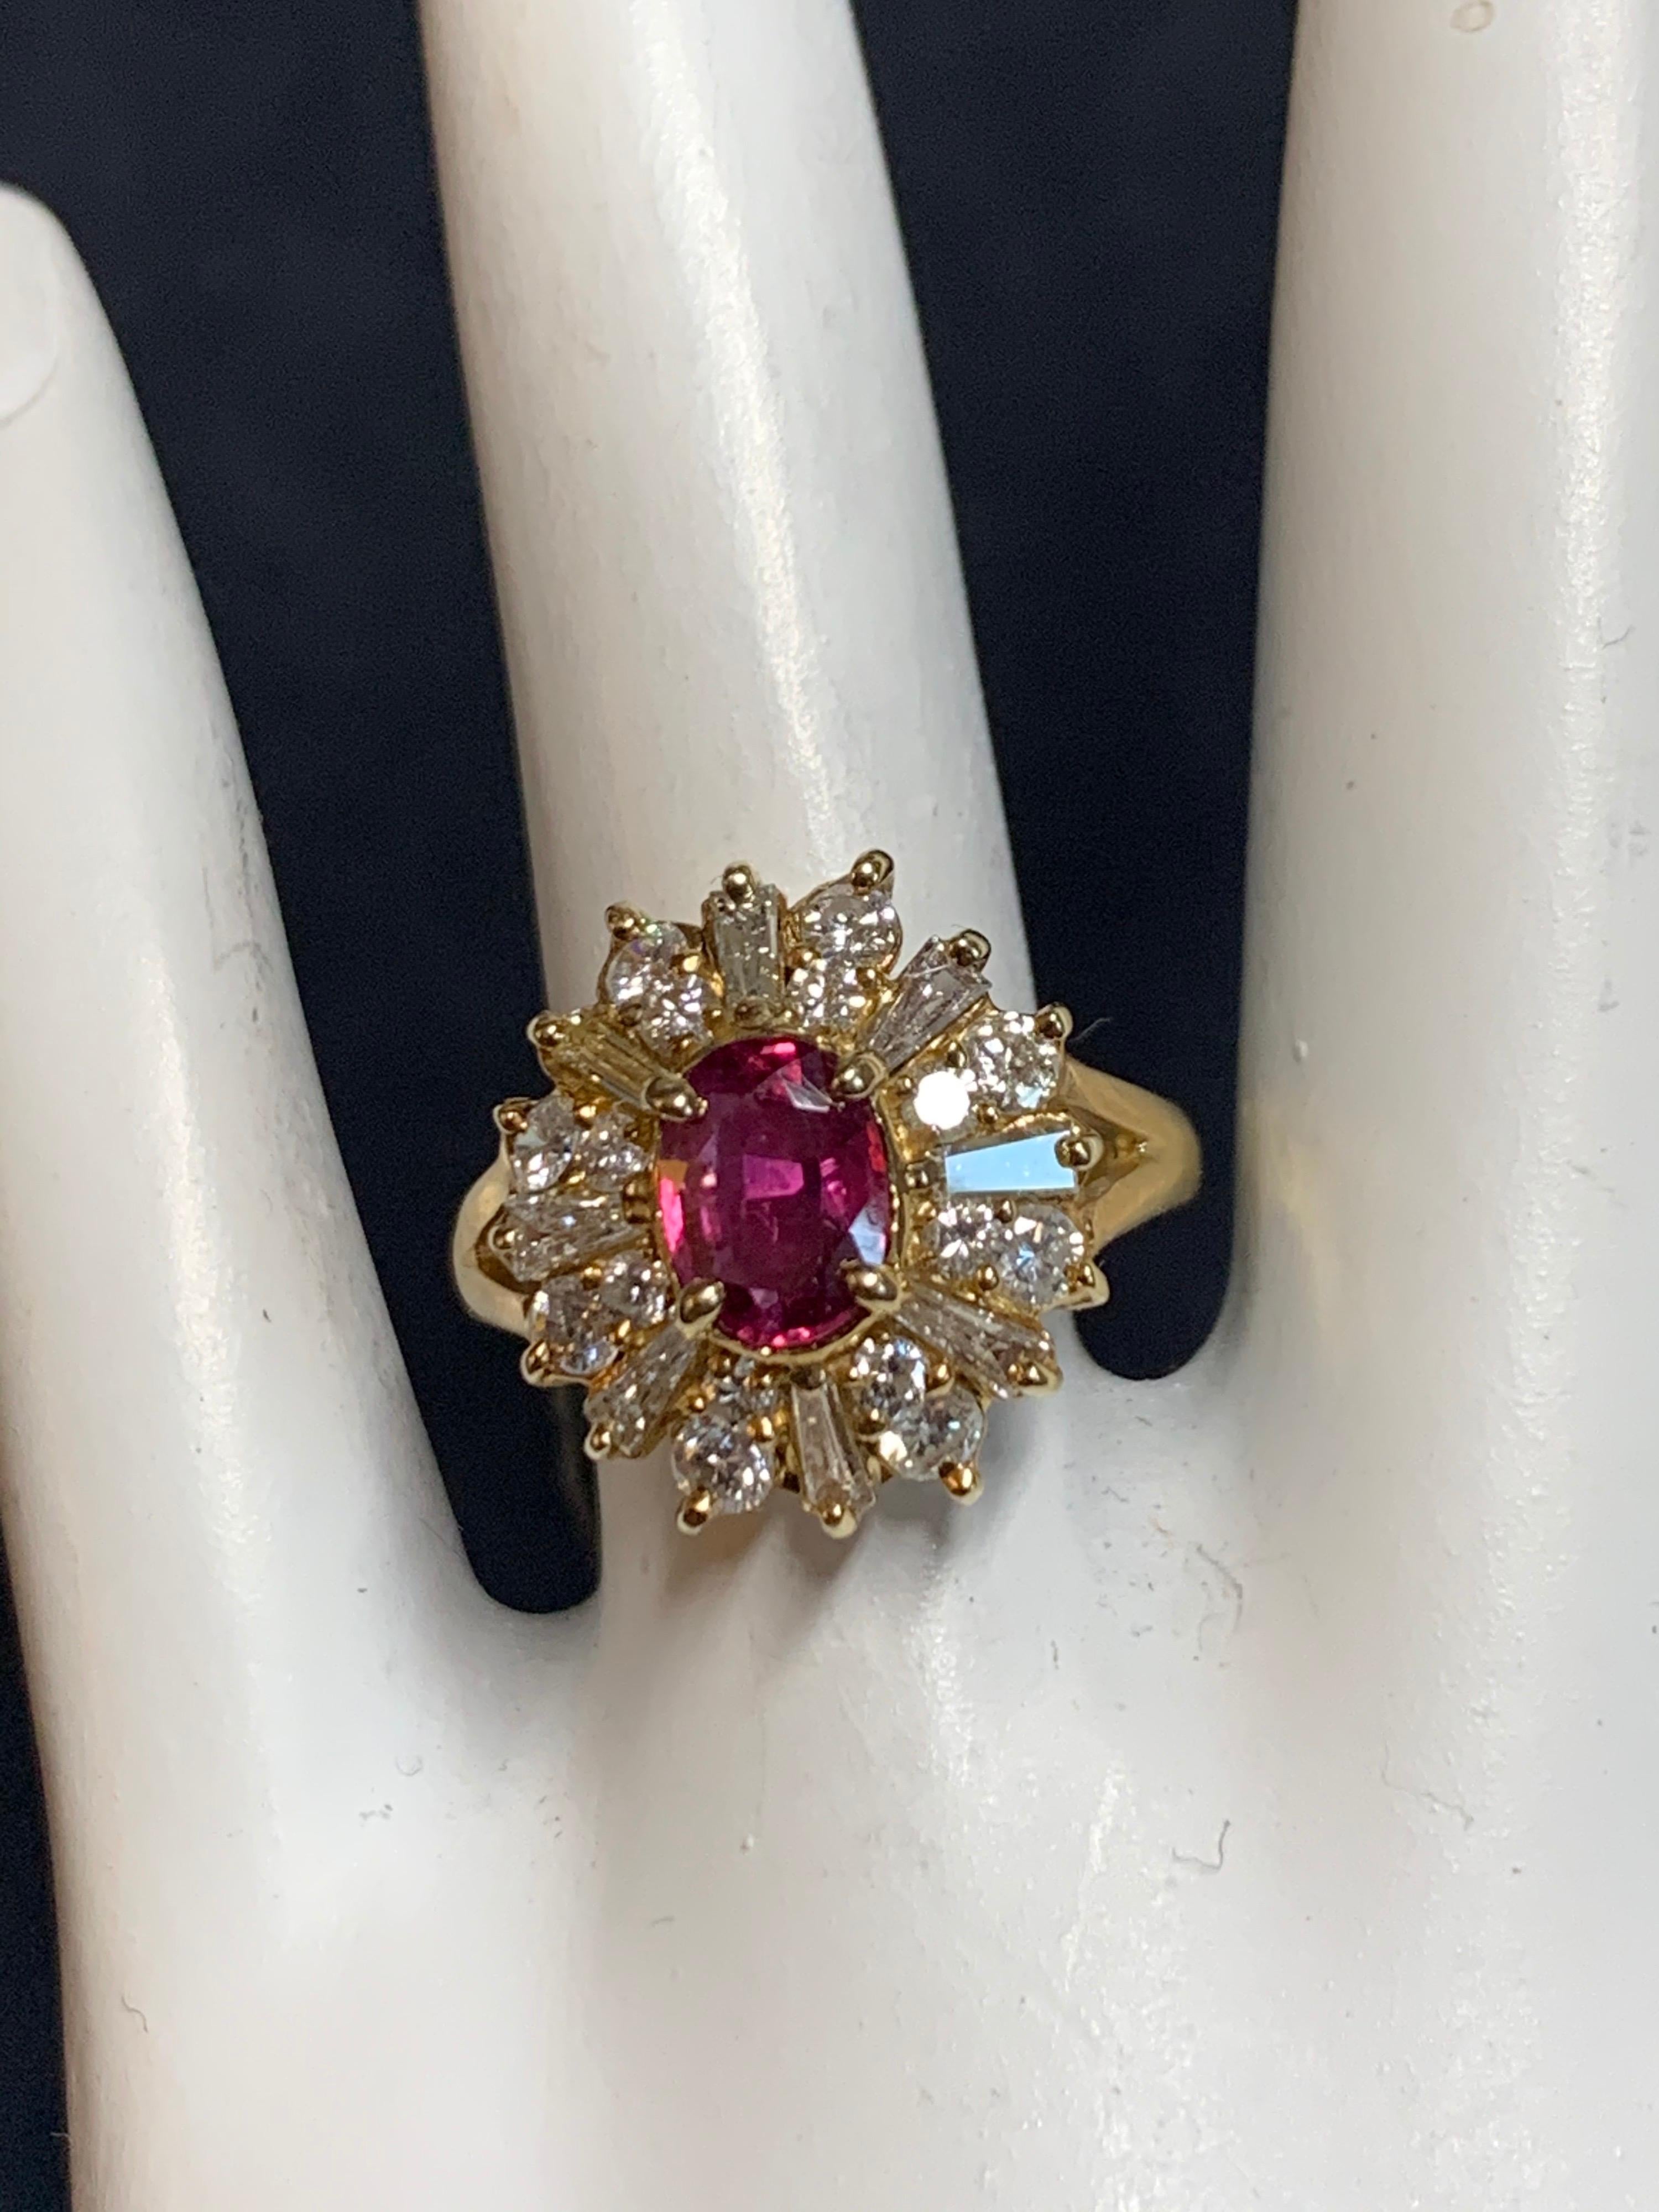 Retro 14k Yellow Gold Cocktail Ring 1.85 Carat Natural Oval Ruby & Diamond Cocktail Circa 1960.

The Natural Oval Ruby weights are approximately 0.85 carats (7x5.2x2.5mm) along with 24 natural round & baguette diamonds (G-I color & VS-I clarity)